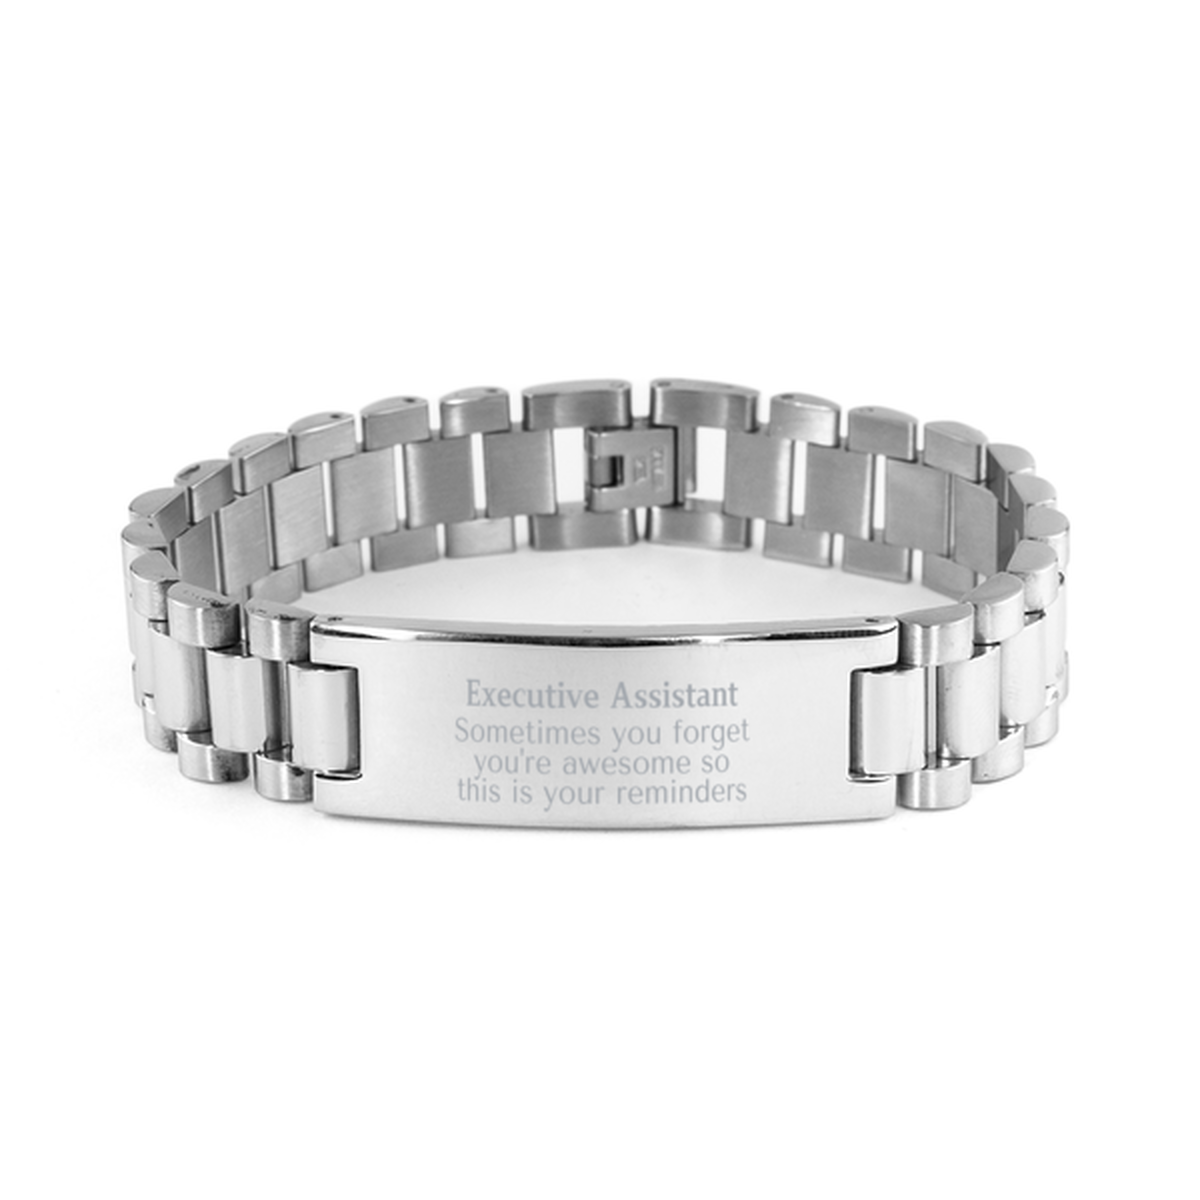 Sentimental Executive Assistant Ladder Stainless Steel Bracelet, Executive Assistant Sometimes you forget you're awesome so this is your reminders, Graduation Christmas Birthday Gifts for Executive Assistant, Men, Women, Coworkers